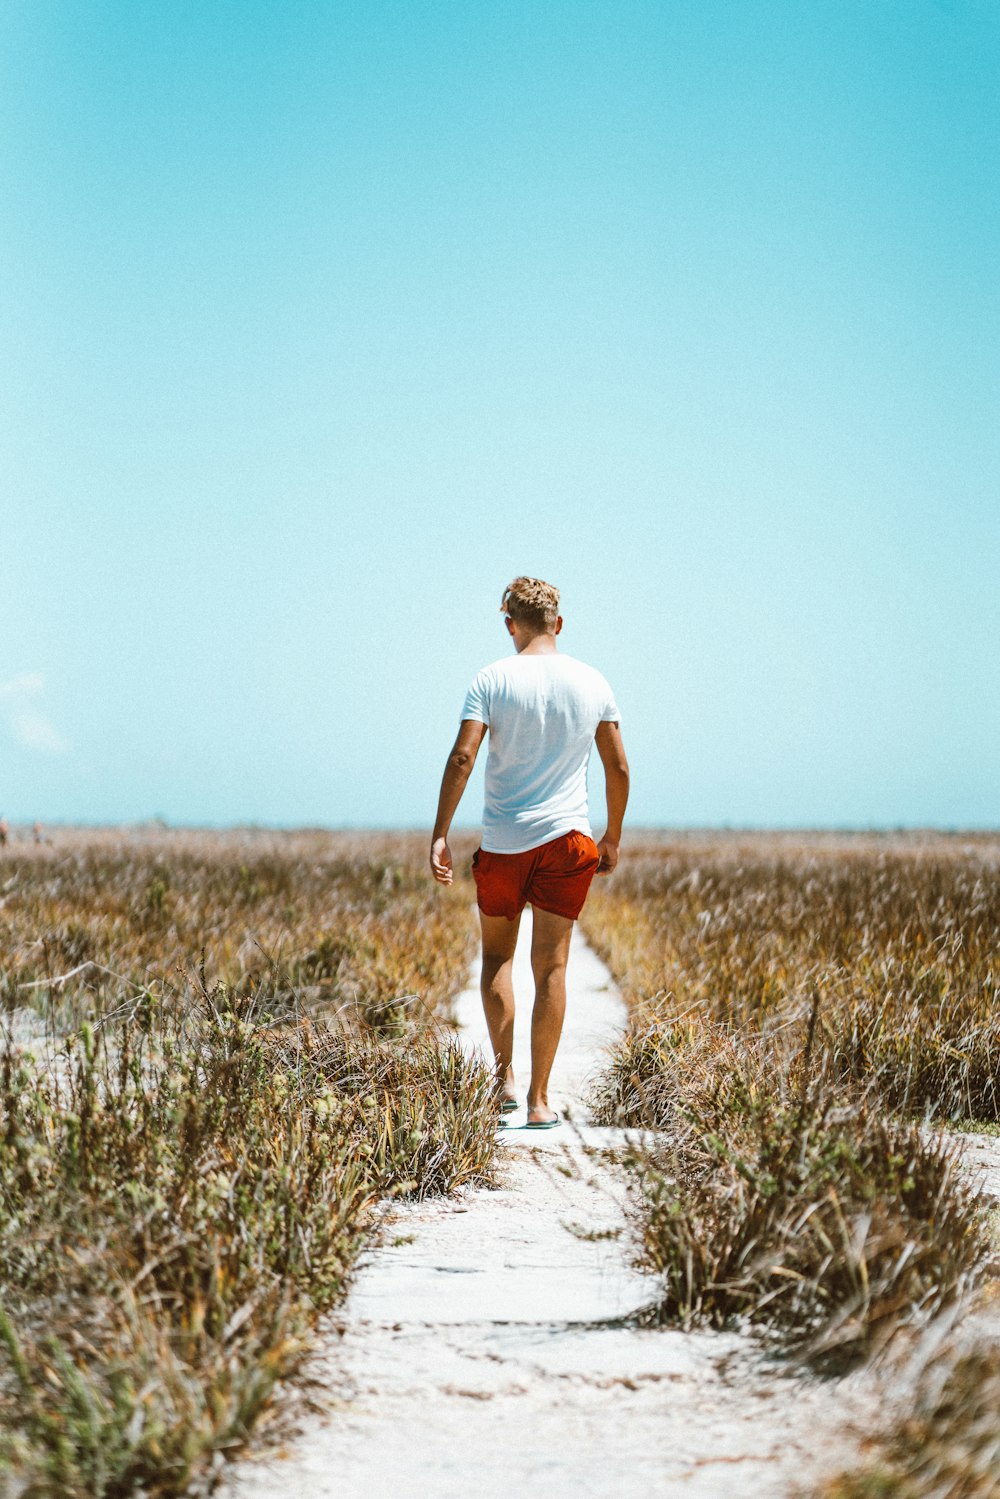 man in white shirt and red shorts walking on white sand between grasses